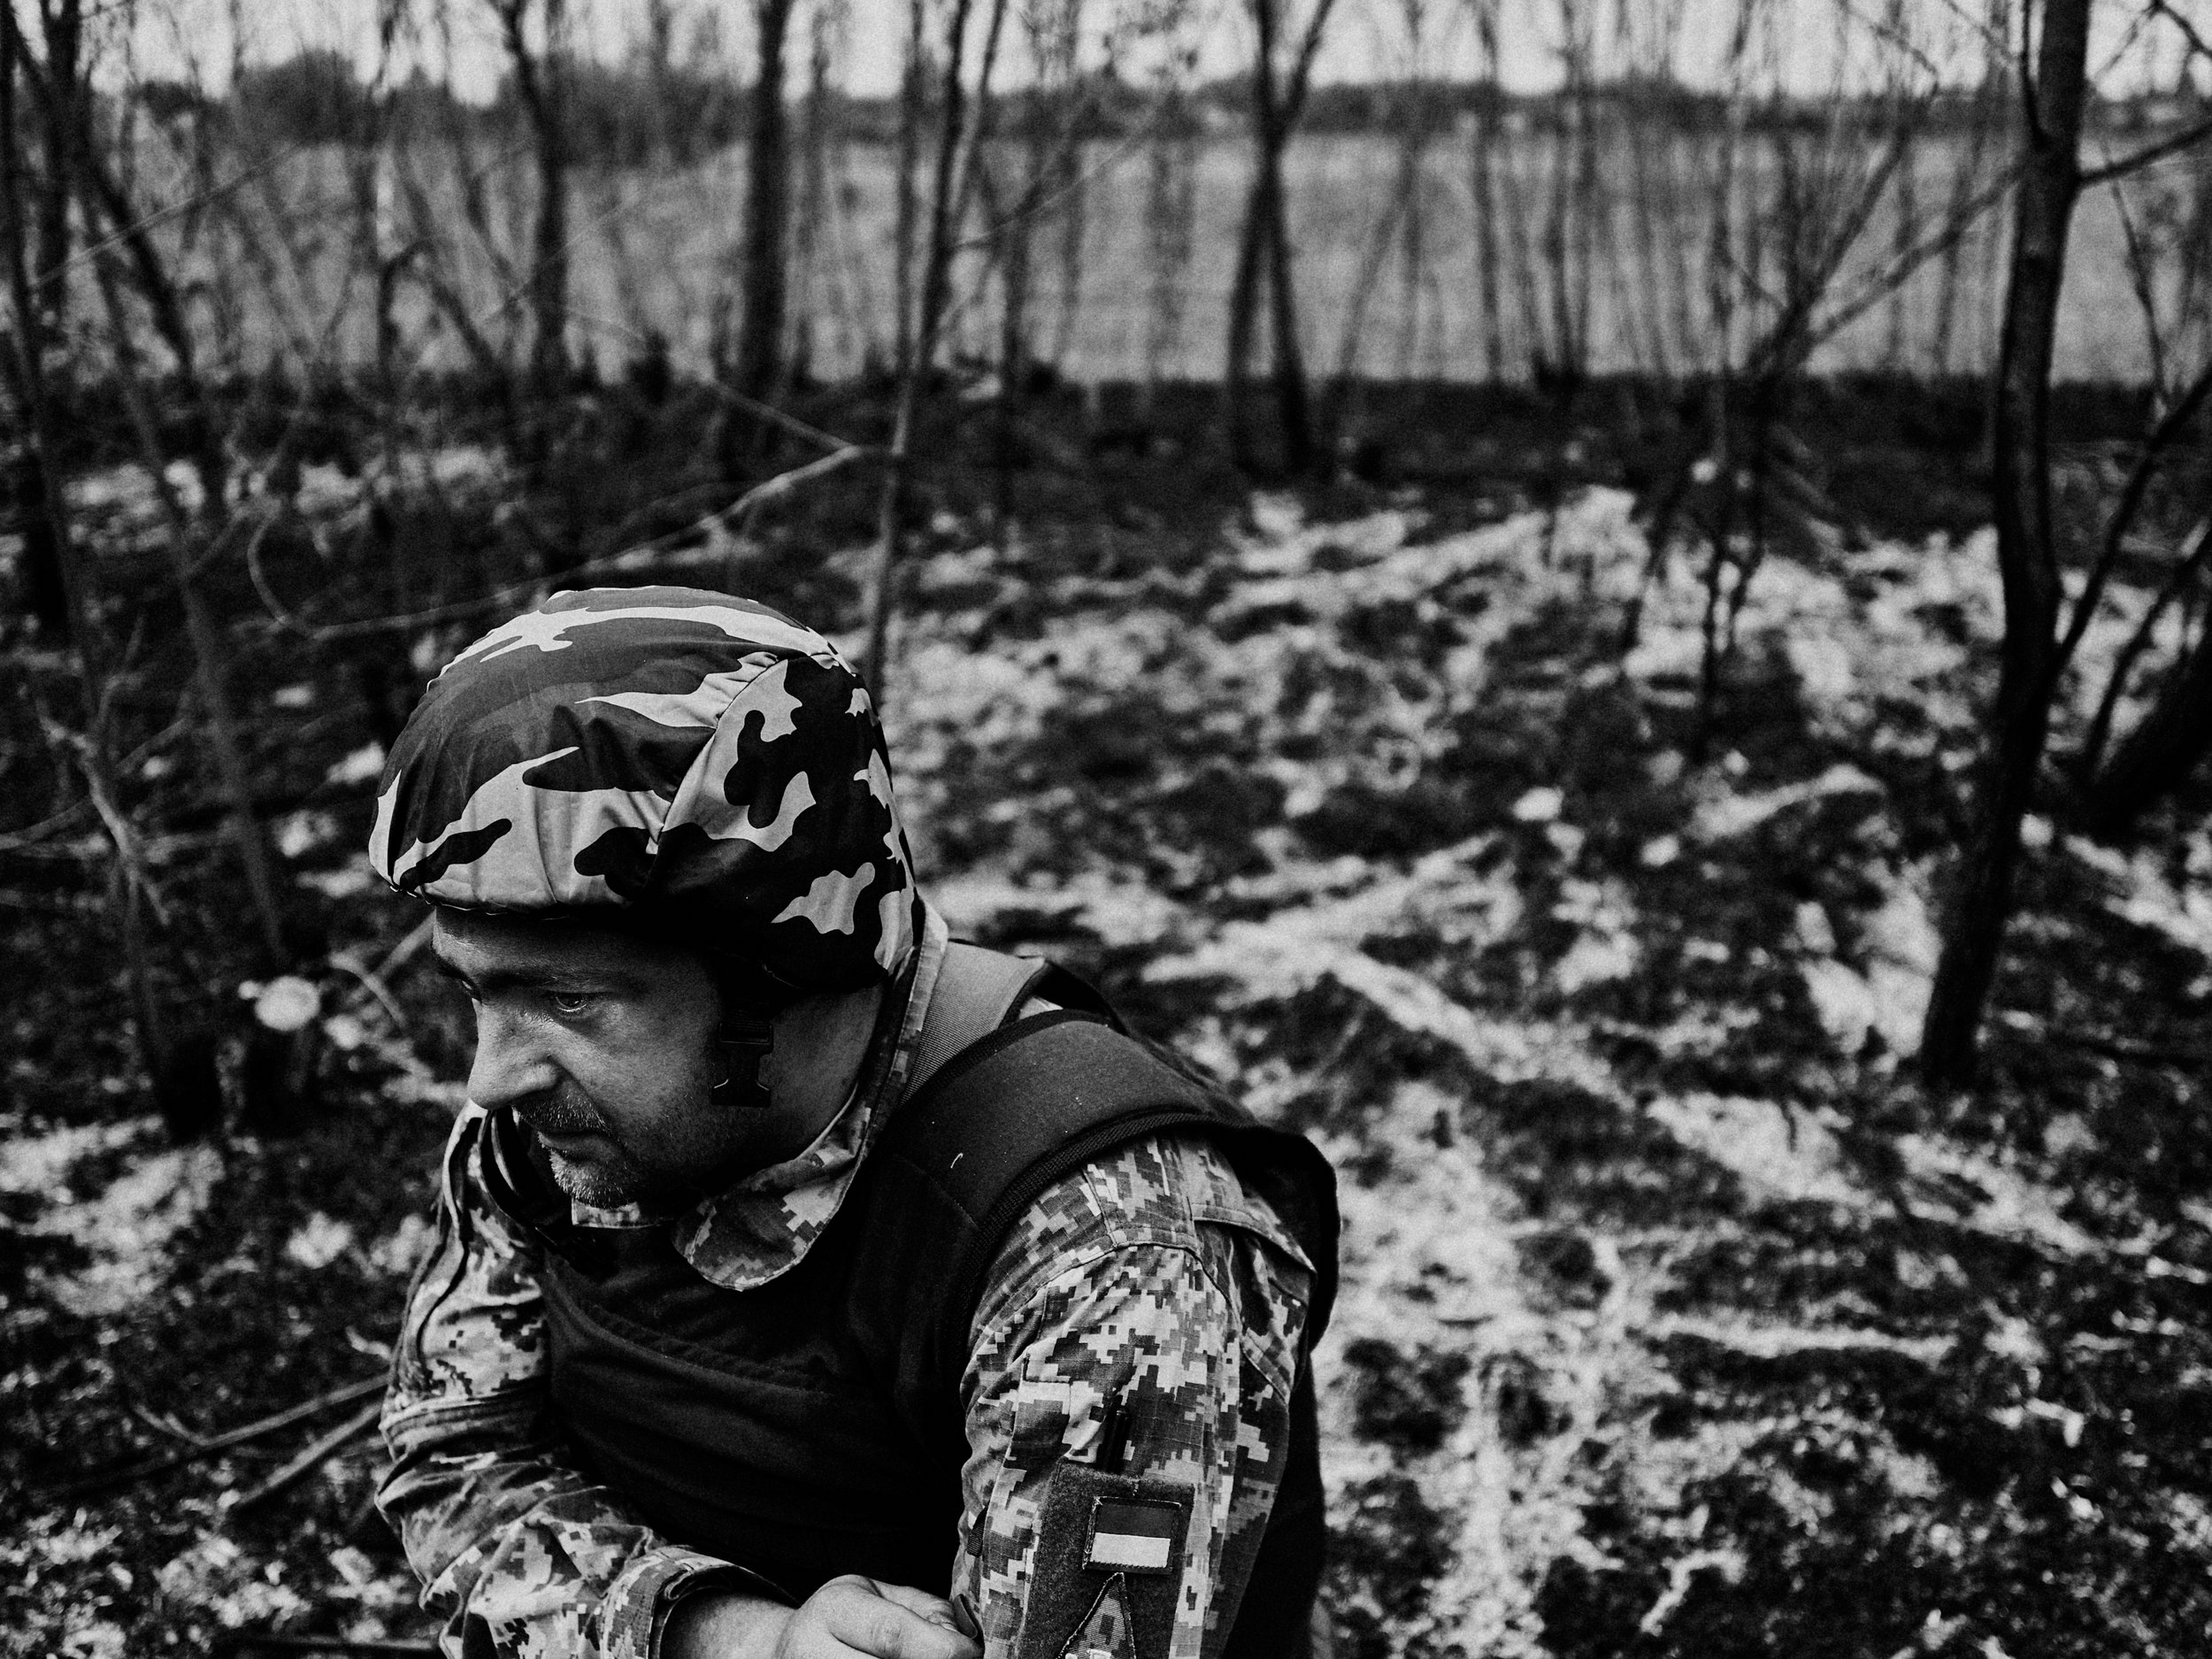 A territorial defense soldier resting in a forest hit with white phosphorous munitions, Zaporizhzhia Oblast